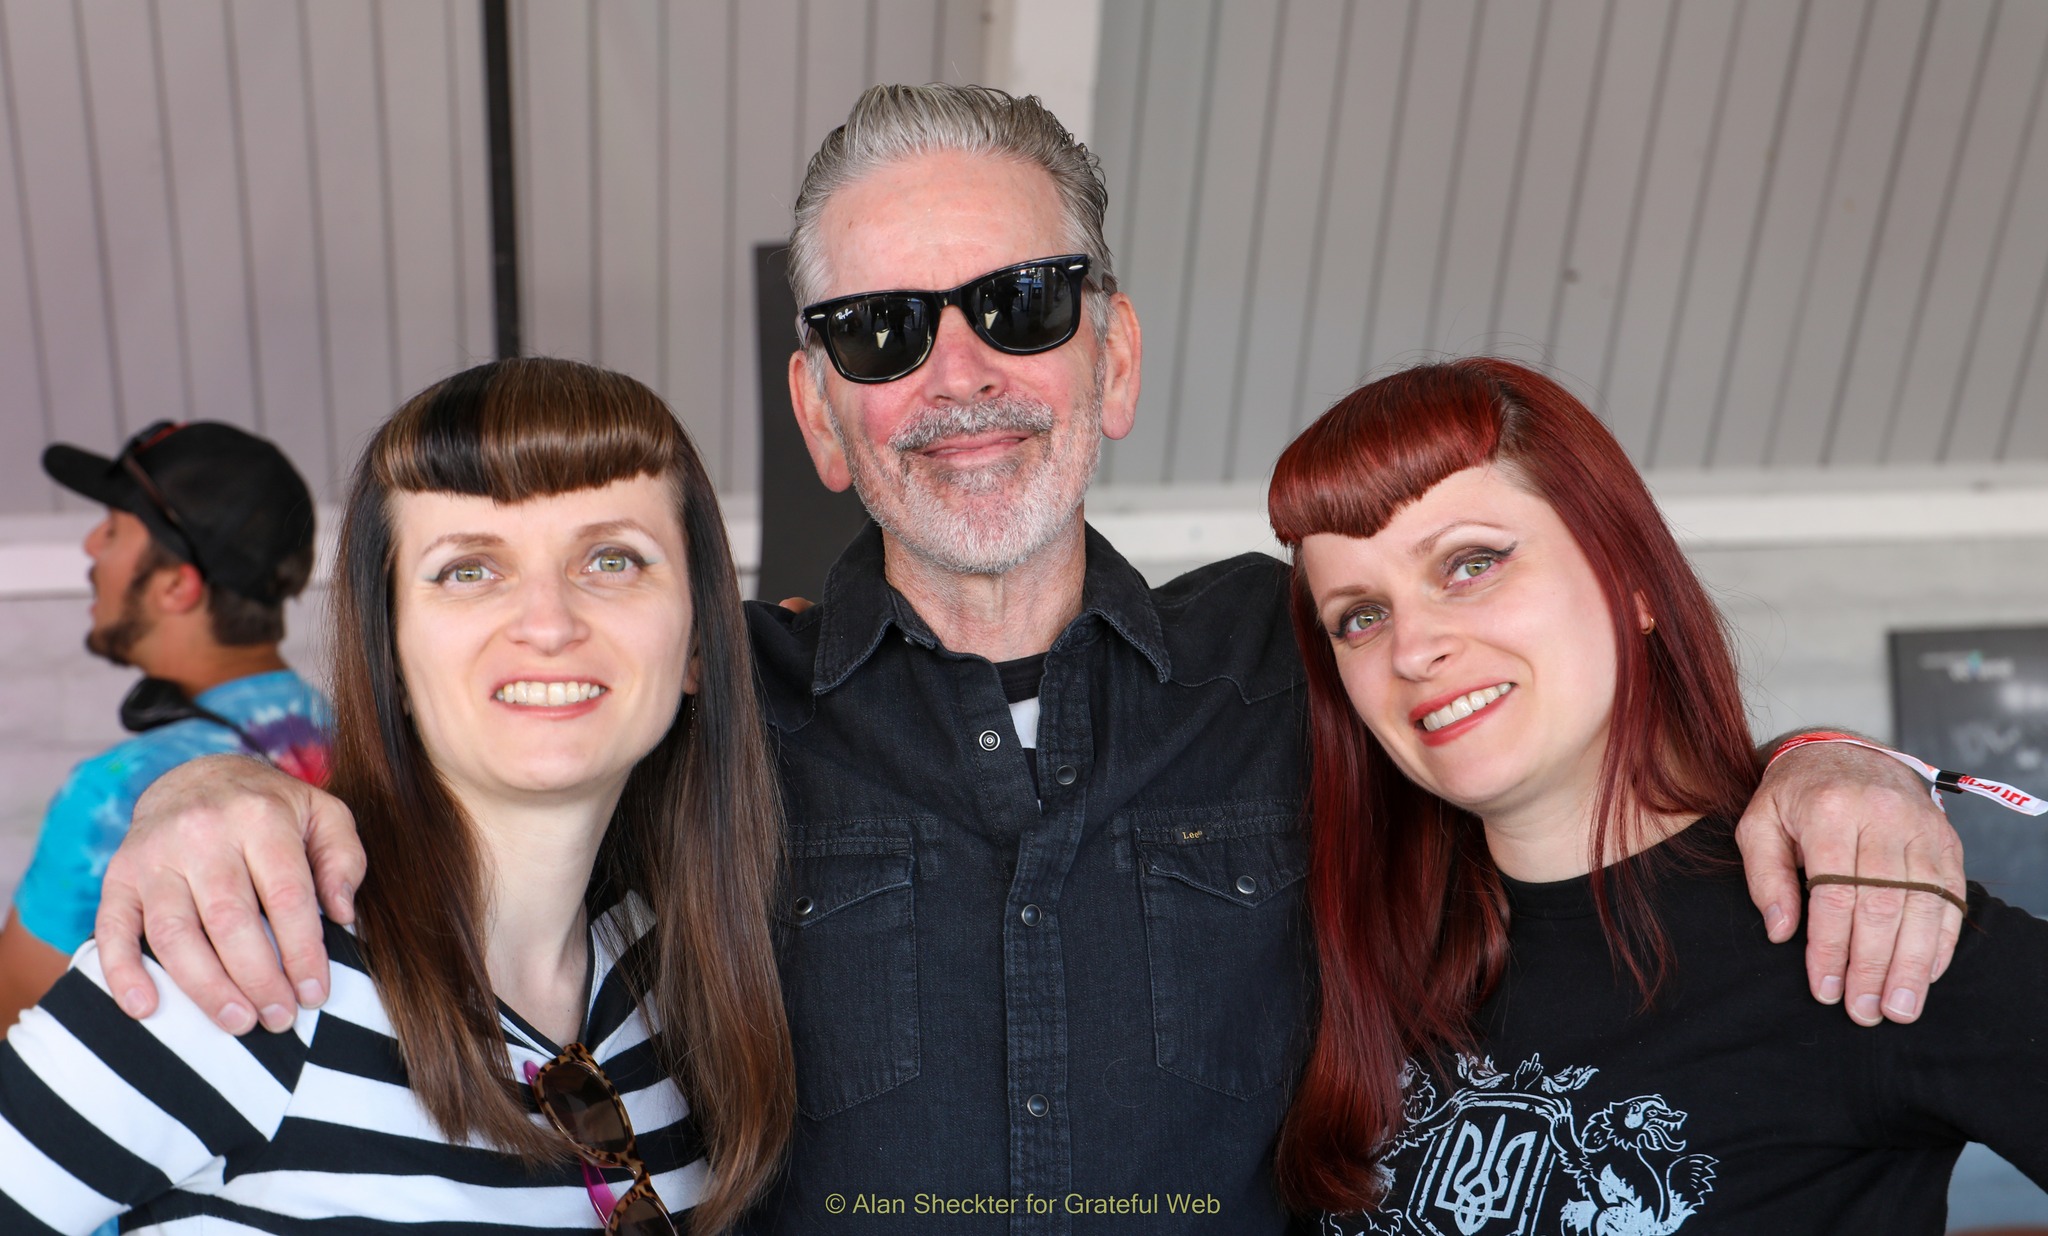 The Mad Twins – Olya and Vira – pose with their friend Jonny Two Bags of Social Distortion